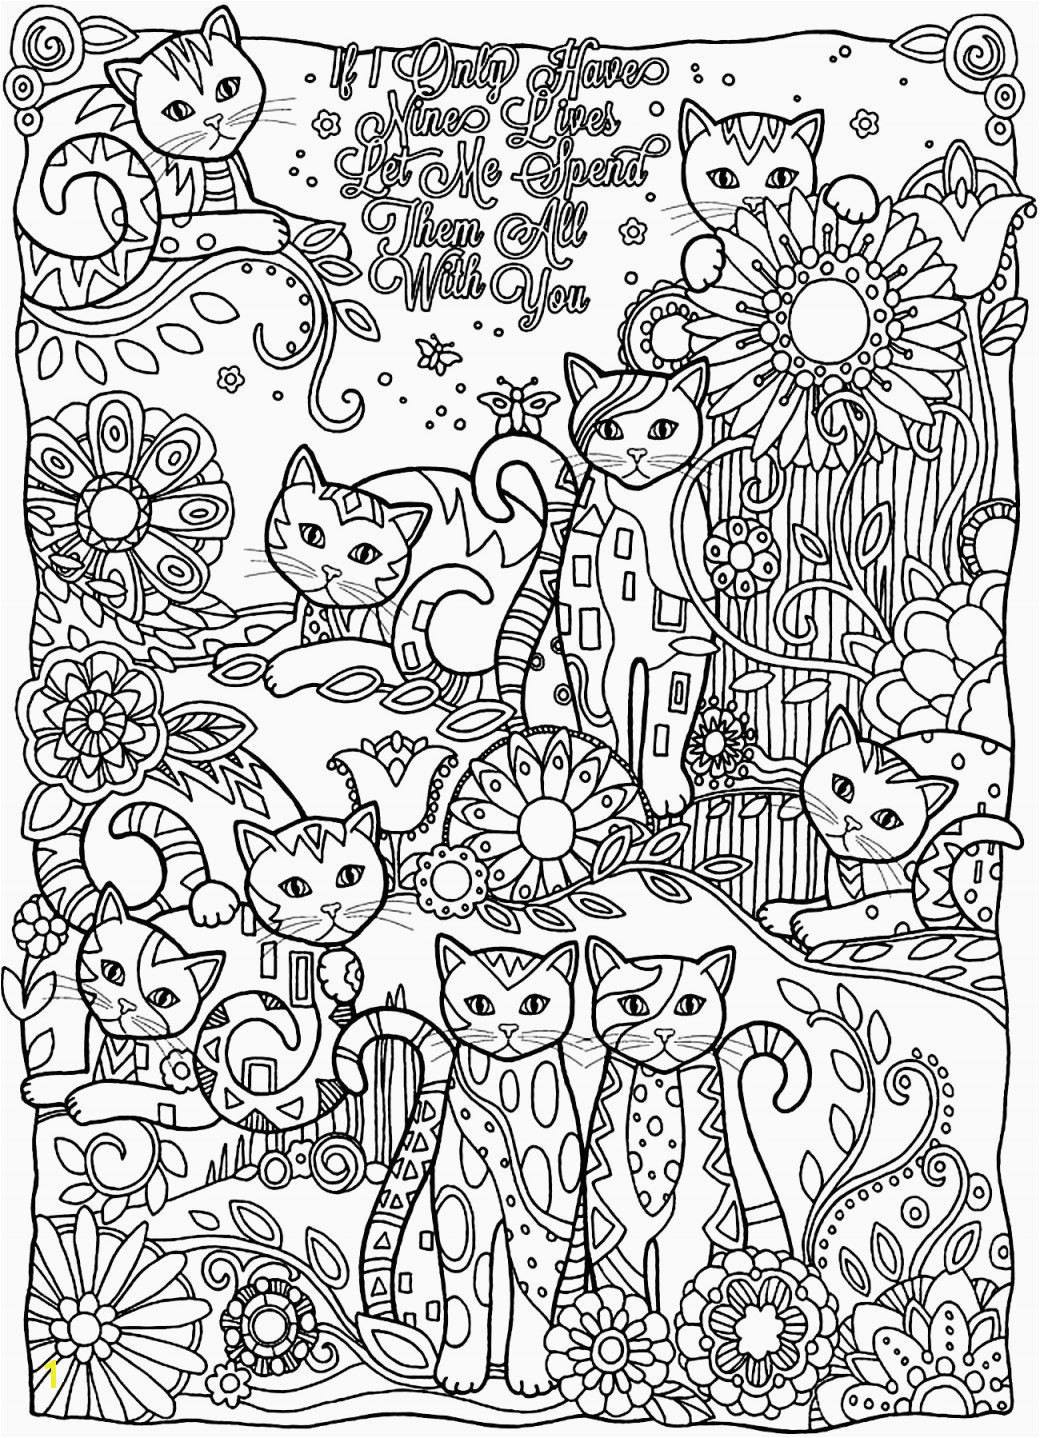 Adult Coloring Pages Abstract New Cute Printable Coloring Pages New Printable Od Dog Coloring Pages Ruva